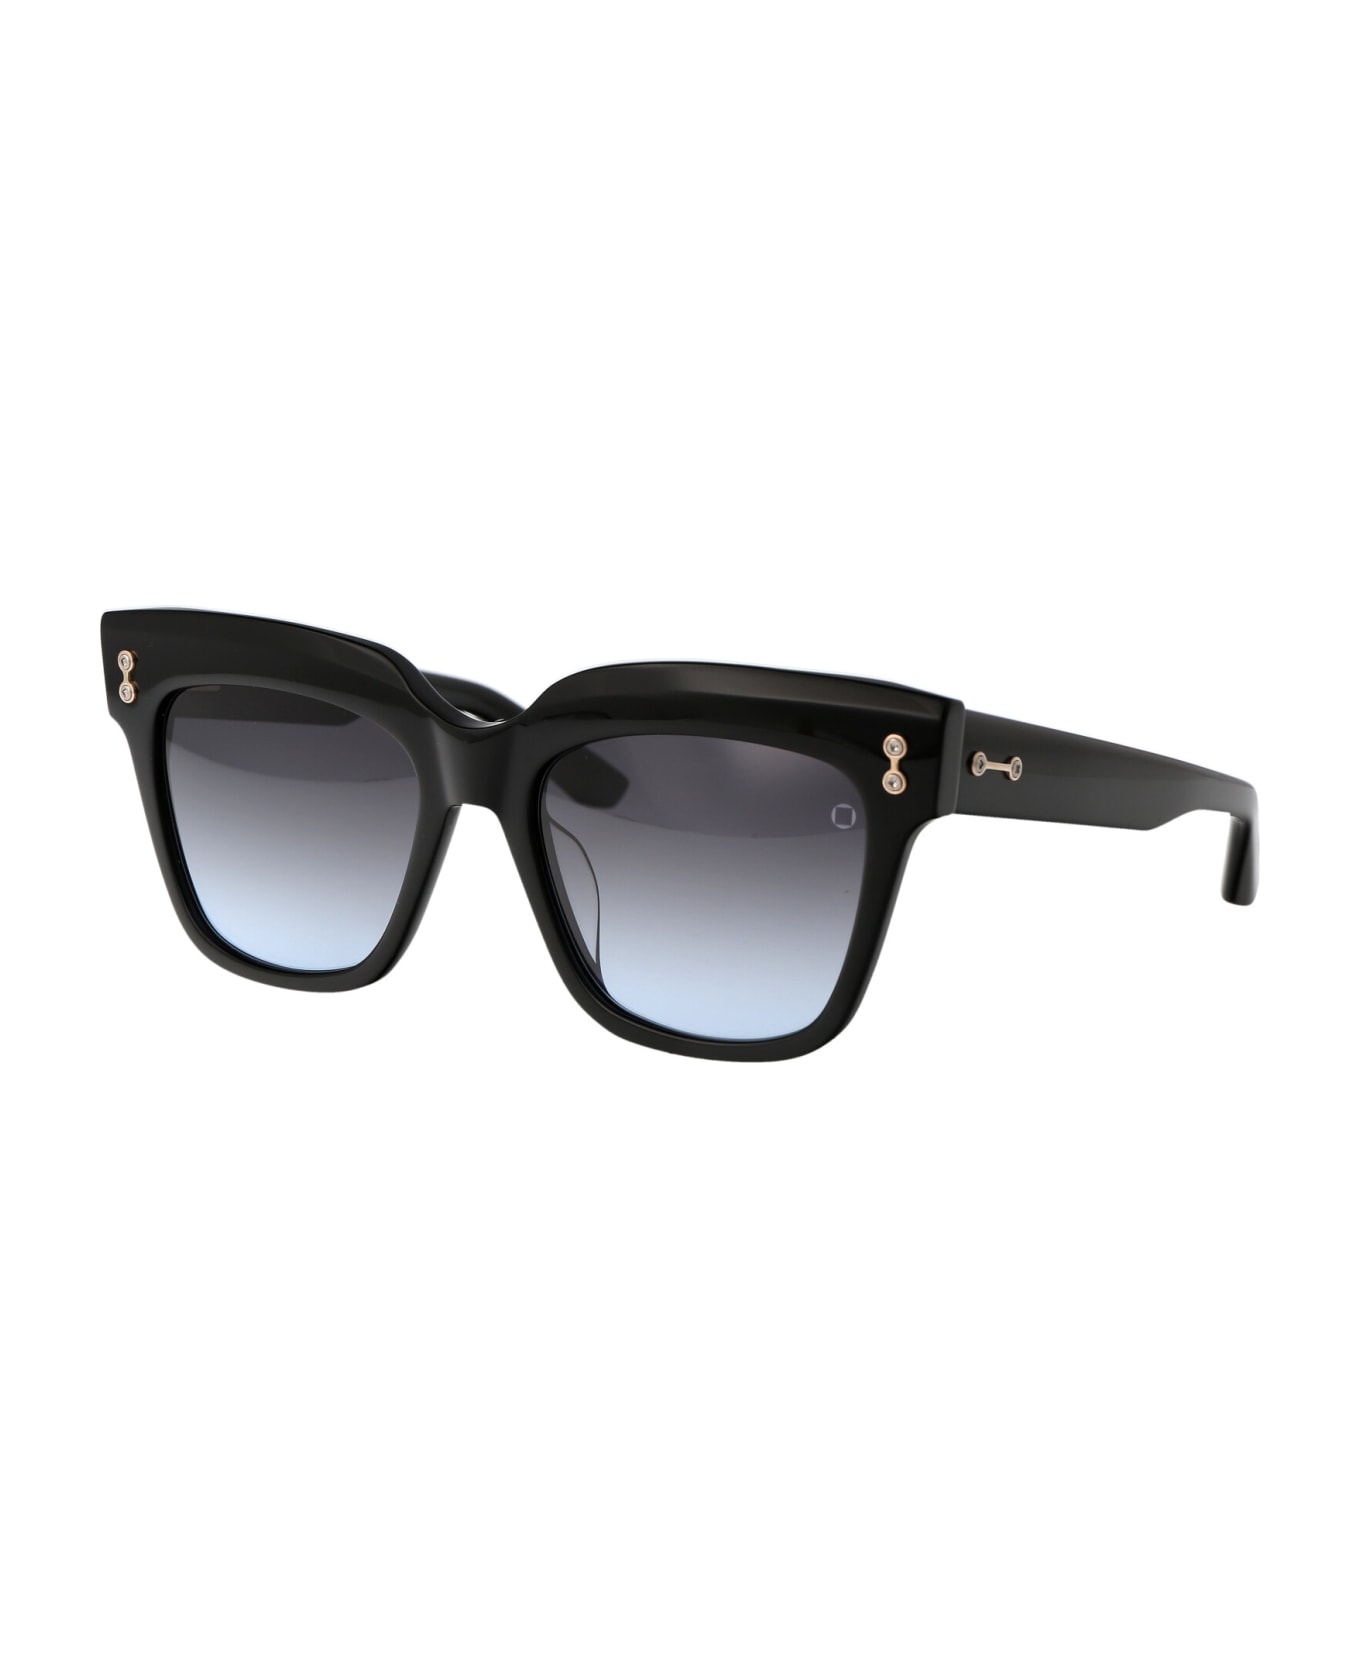 Akoni Lyra Sunglasses cat-eye - Complement your chic style with a fabulous pair of sunglasses